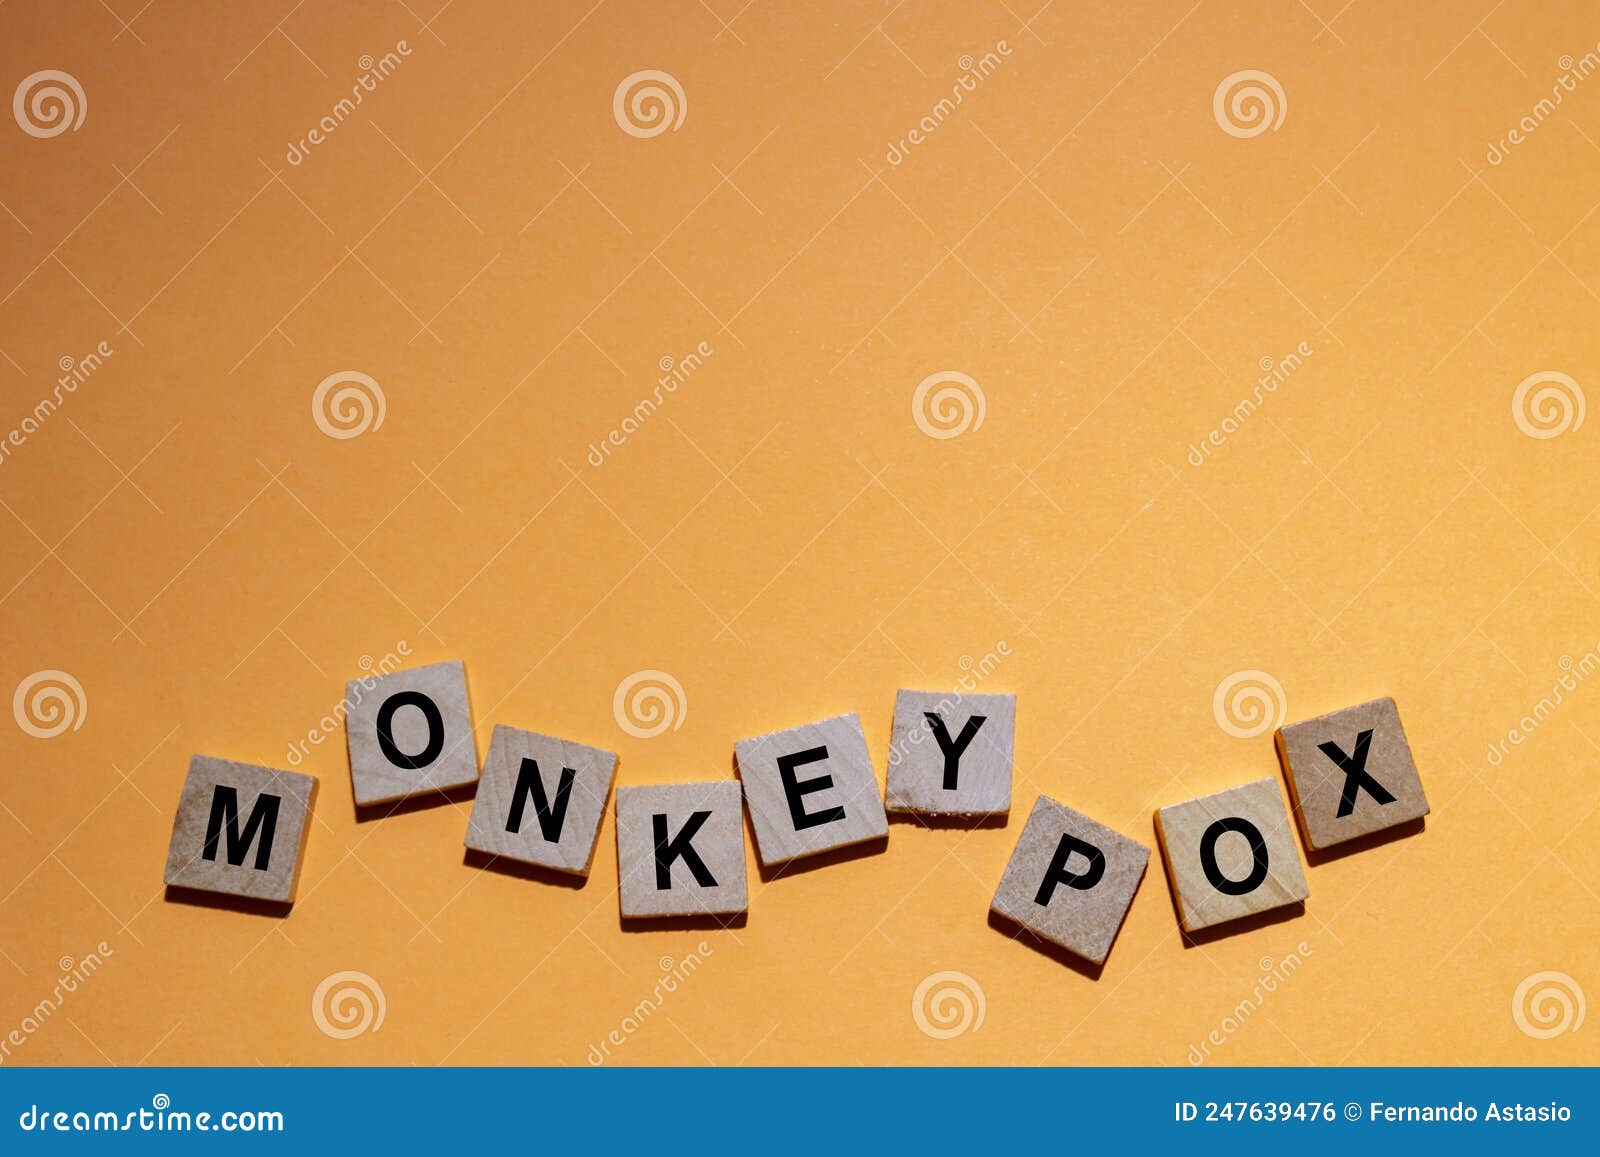 monkeypox. word written on square wooden tiles with an orange background. monkeypox is a zoonotic viral disease